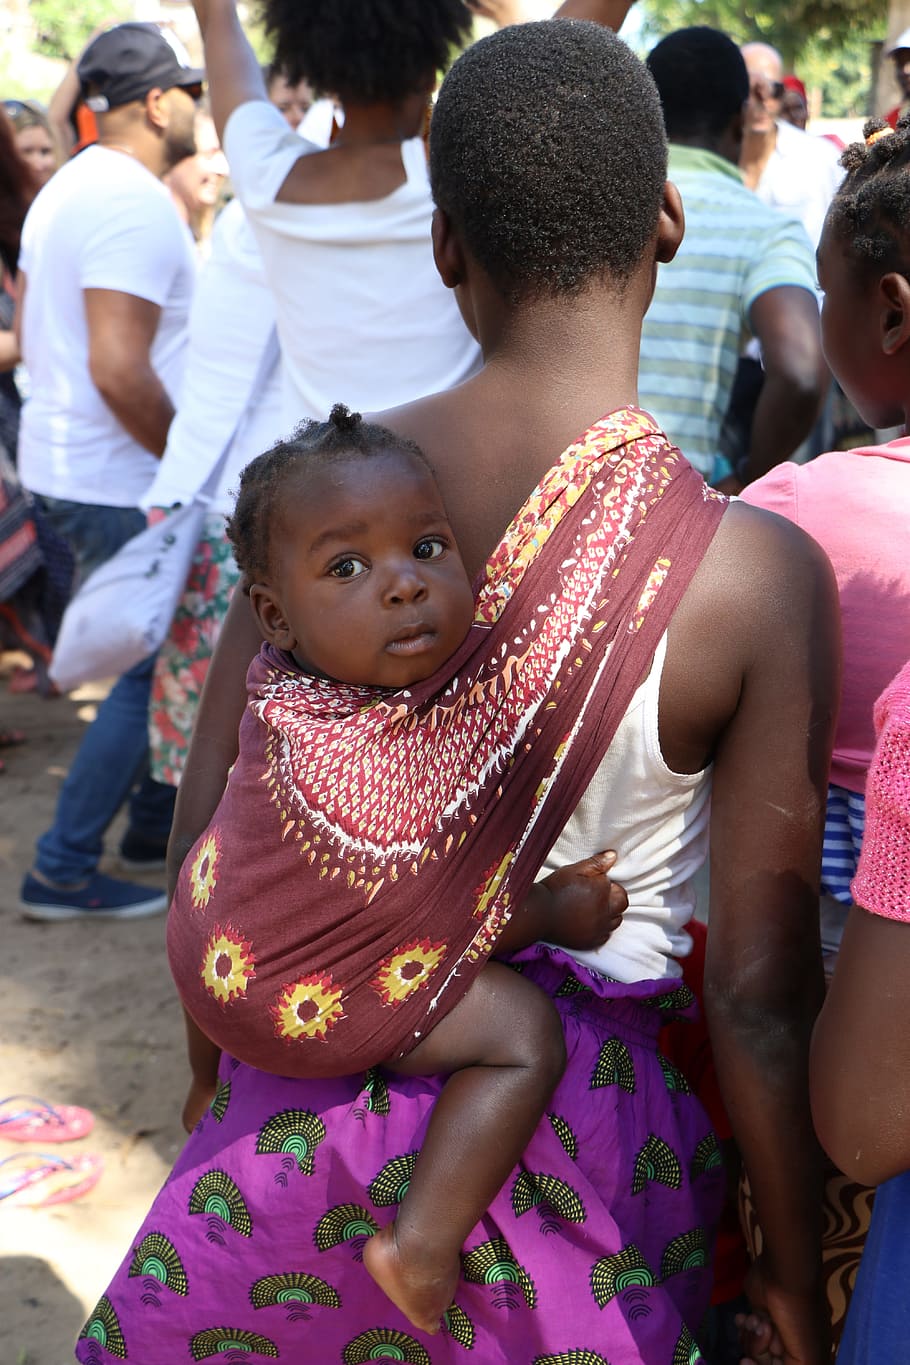 Baby, Sling, Caring, Child, baby, sling, mother, africa, togetherness, people, girls